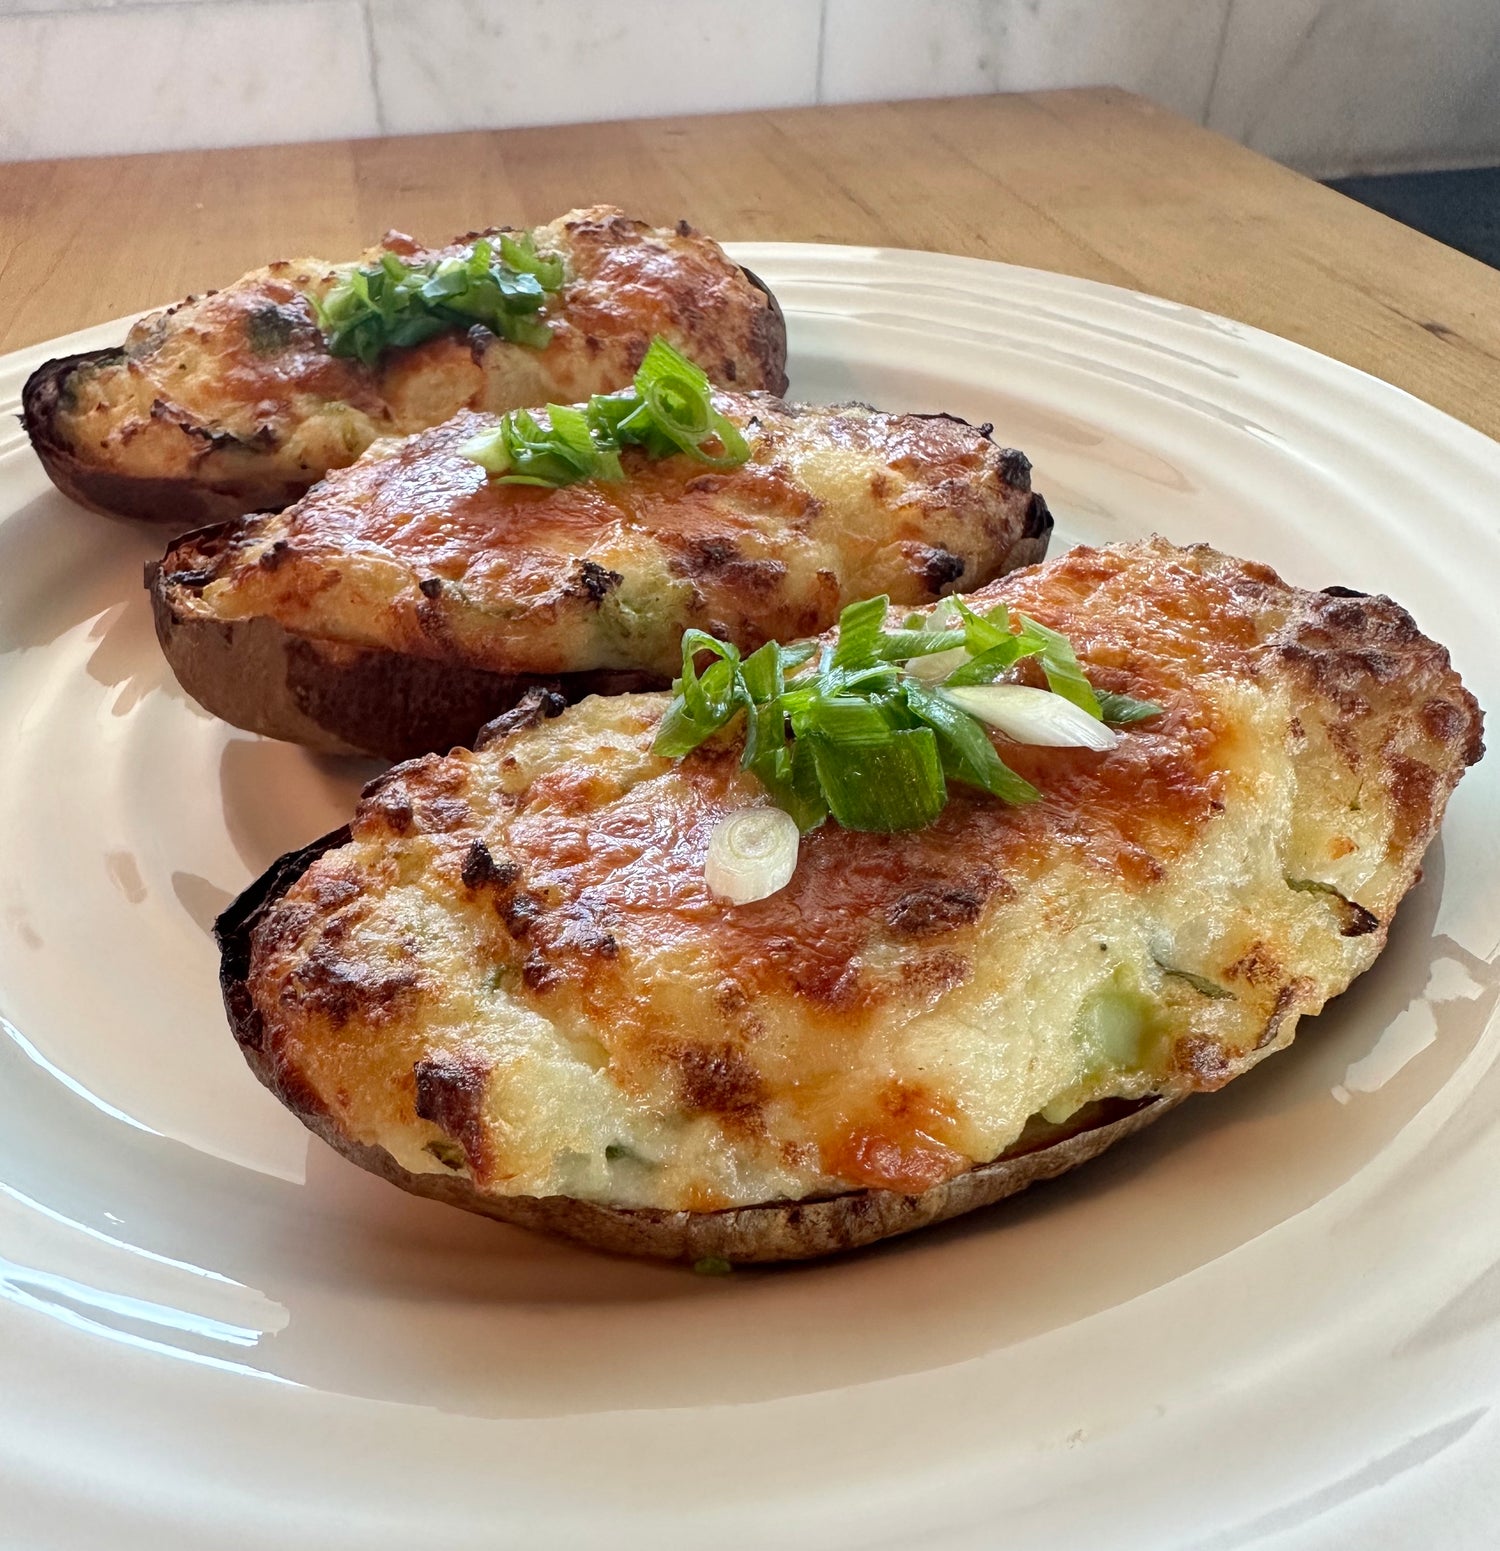 Twice Baked Potatoes with Broccoli & Cheddar